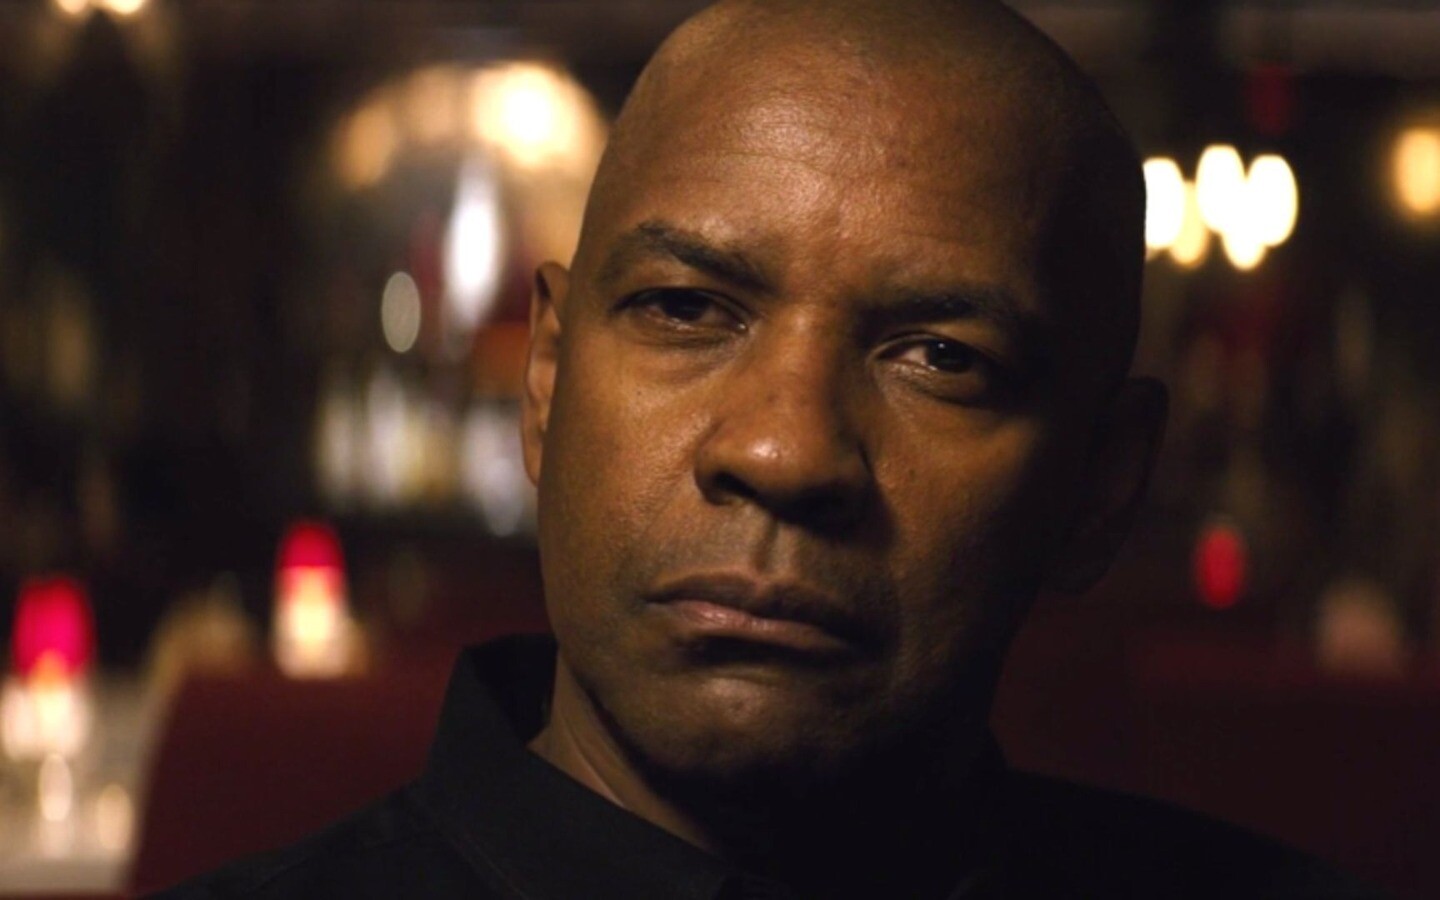 the equalizer 2014